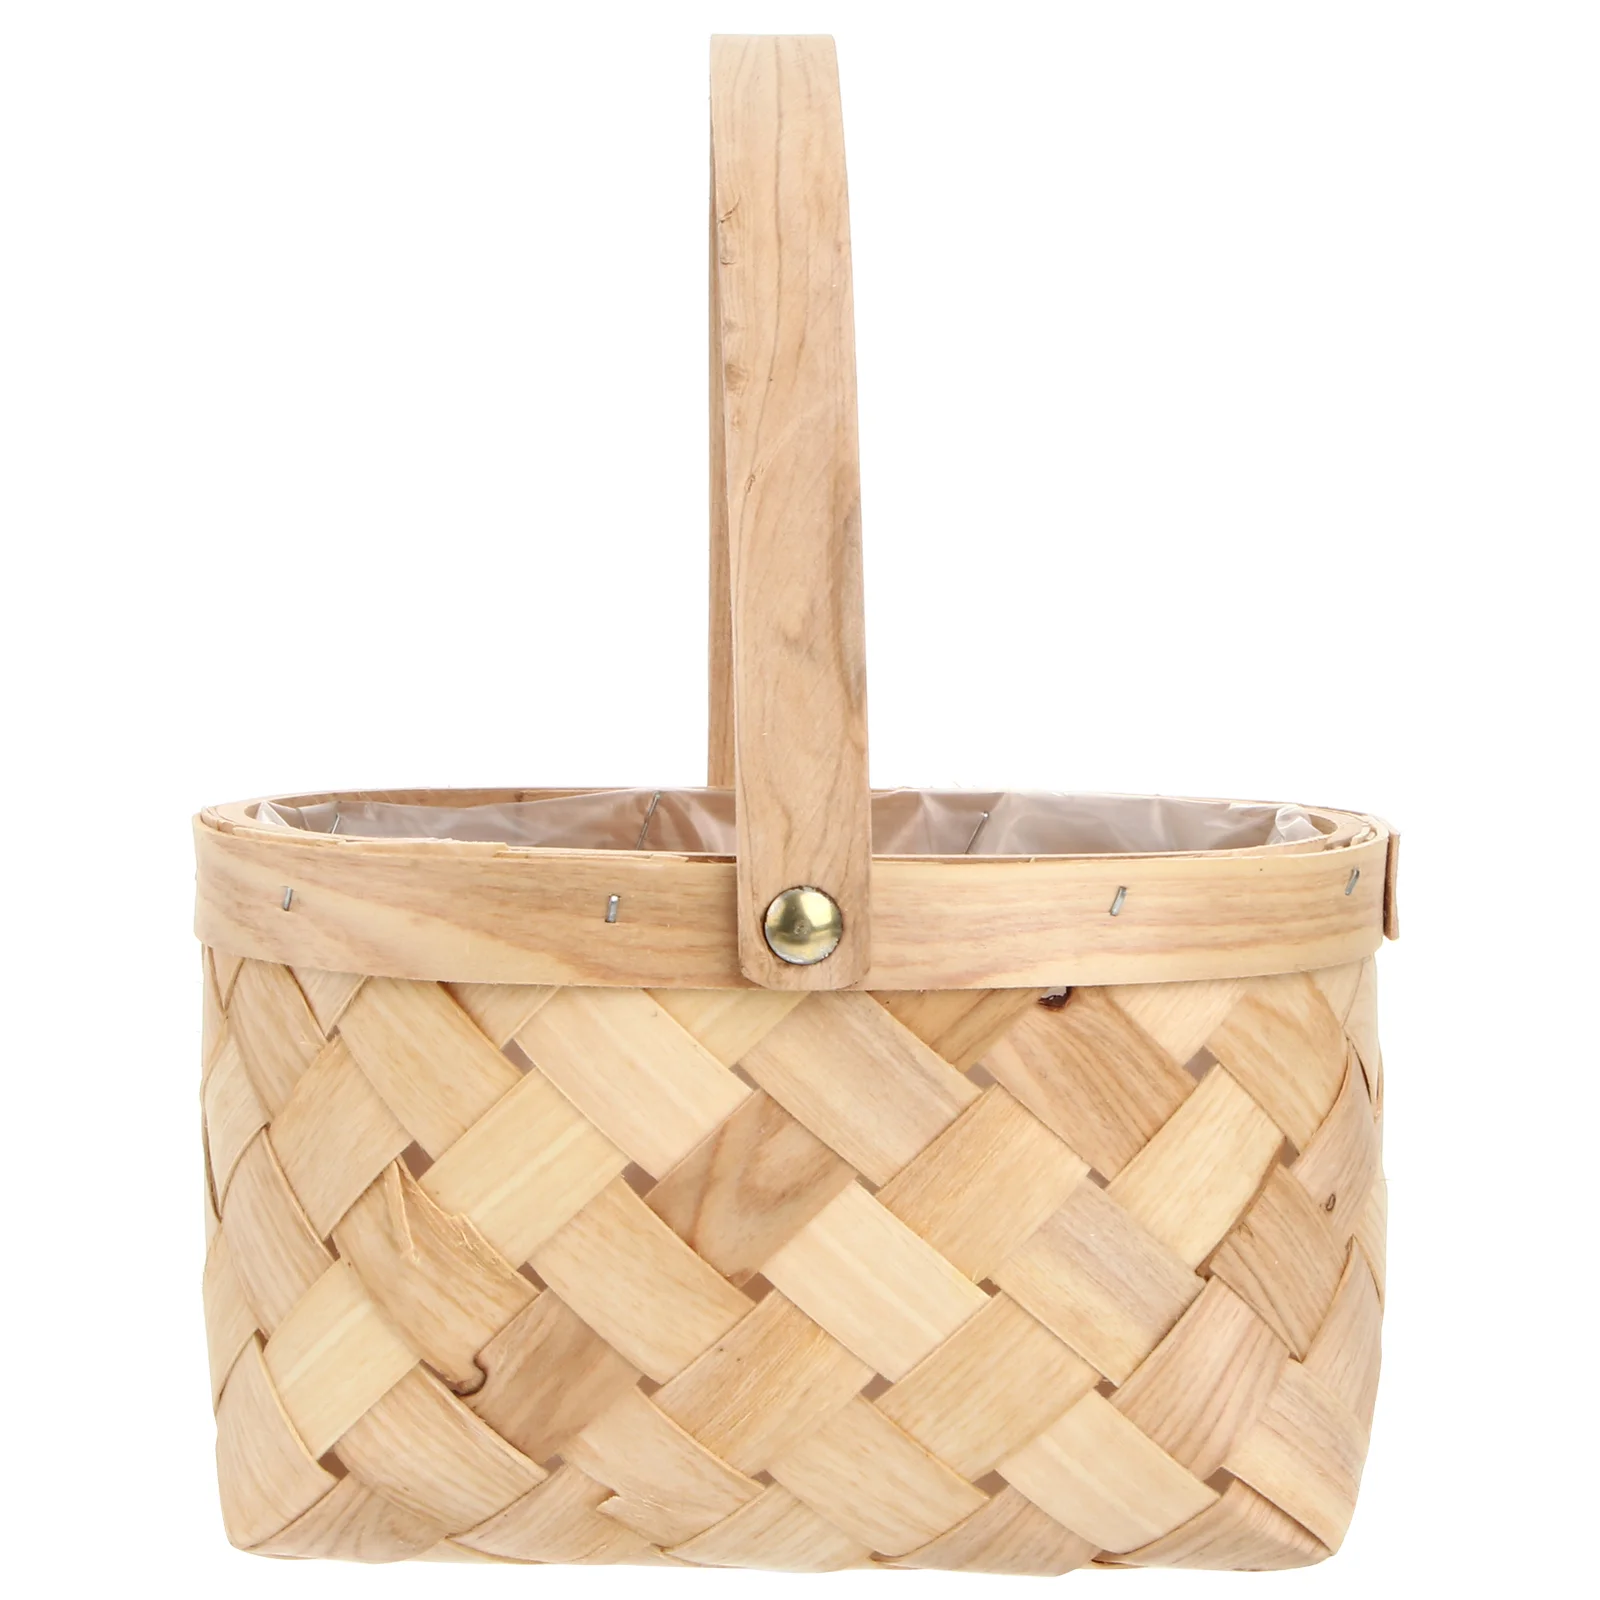 

Basket Storage Woven Handle Wicker Rattan Container Wooden Picnic Baskets Flower Easter Portable Houseware Fruit Willow Natural